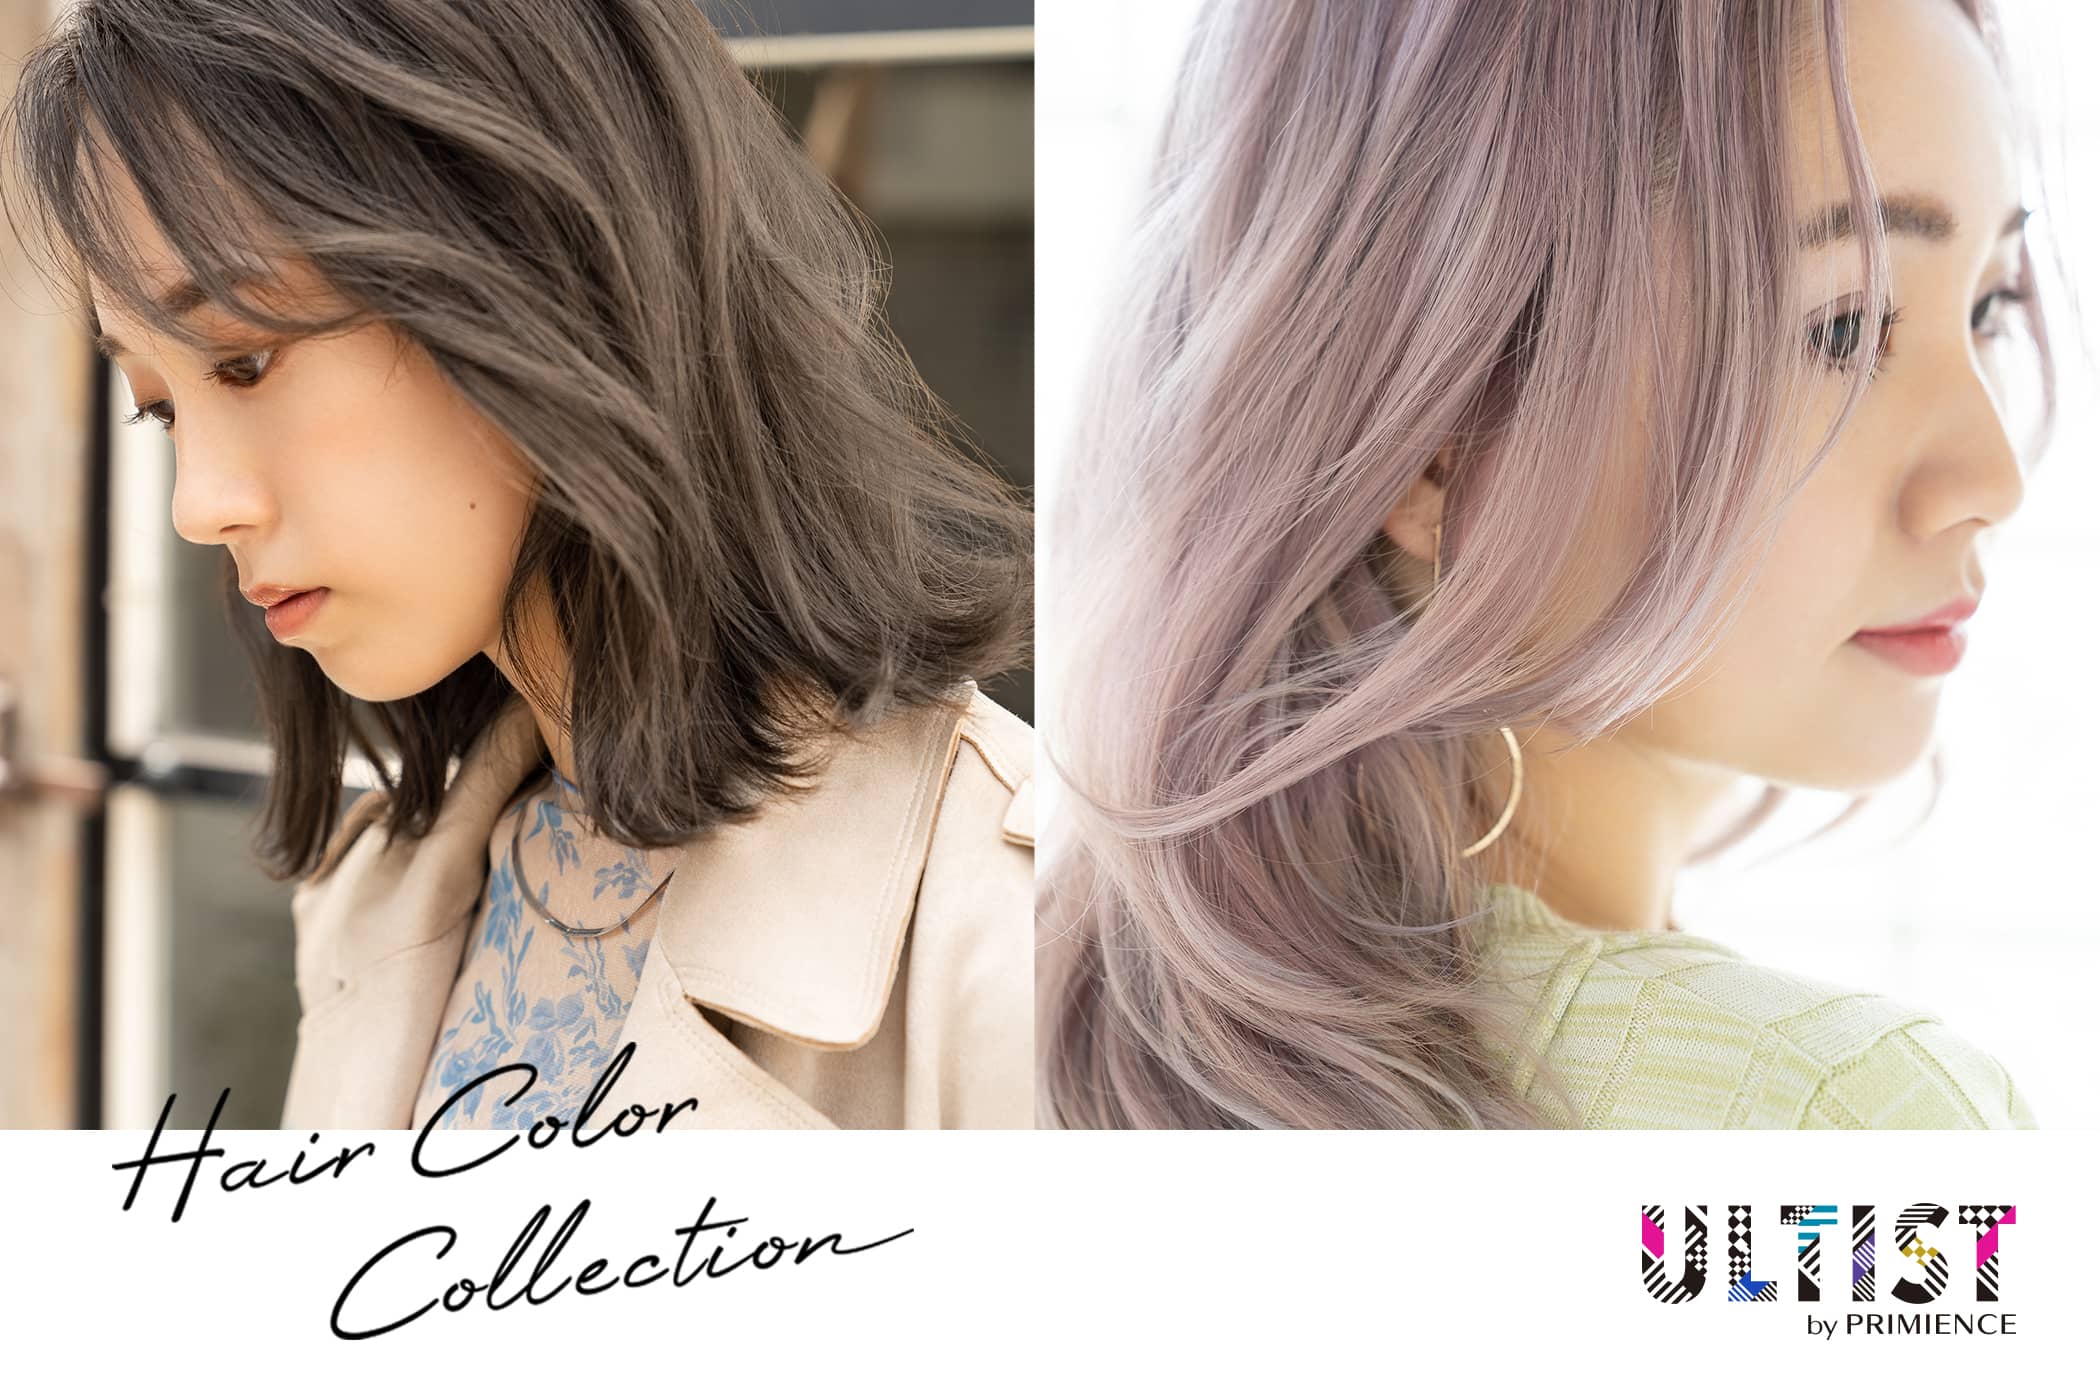 12 color styles using the ULTIST 7 shades color assortment. Discover a new way of using ULTIST that you haven’t tried before. 